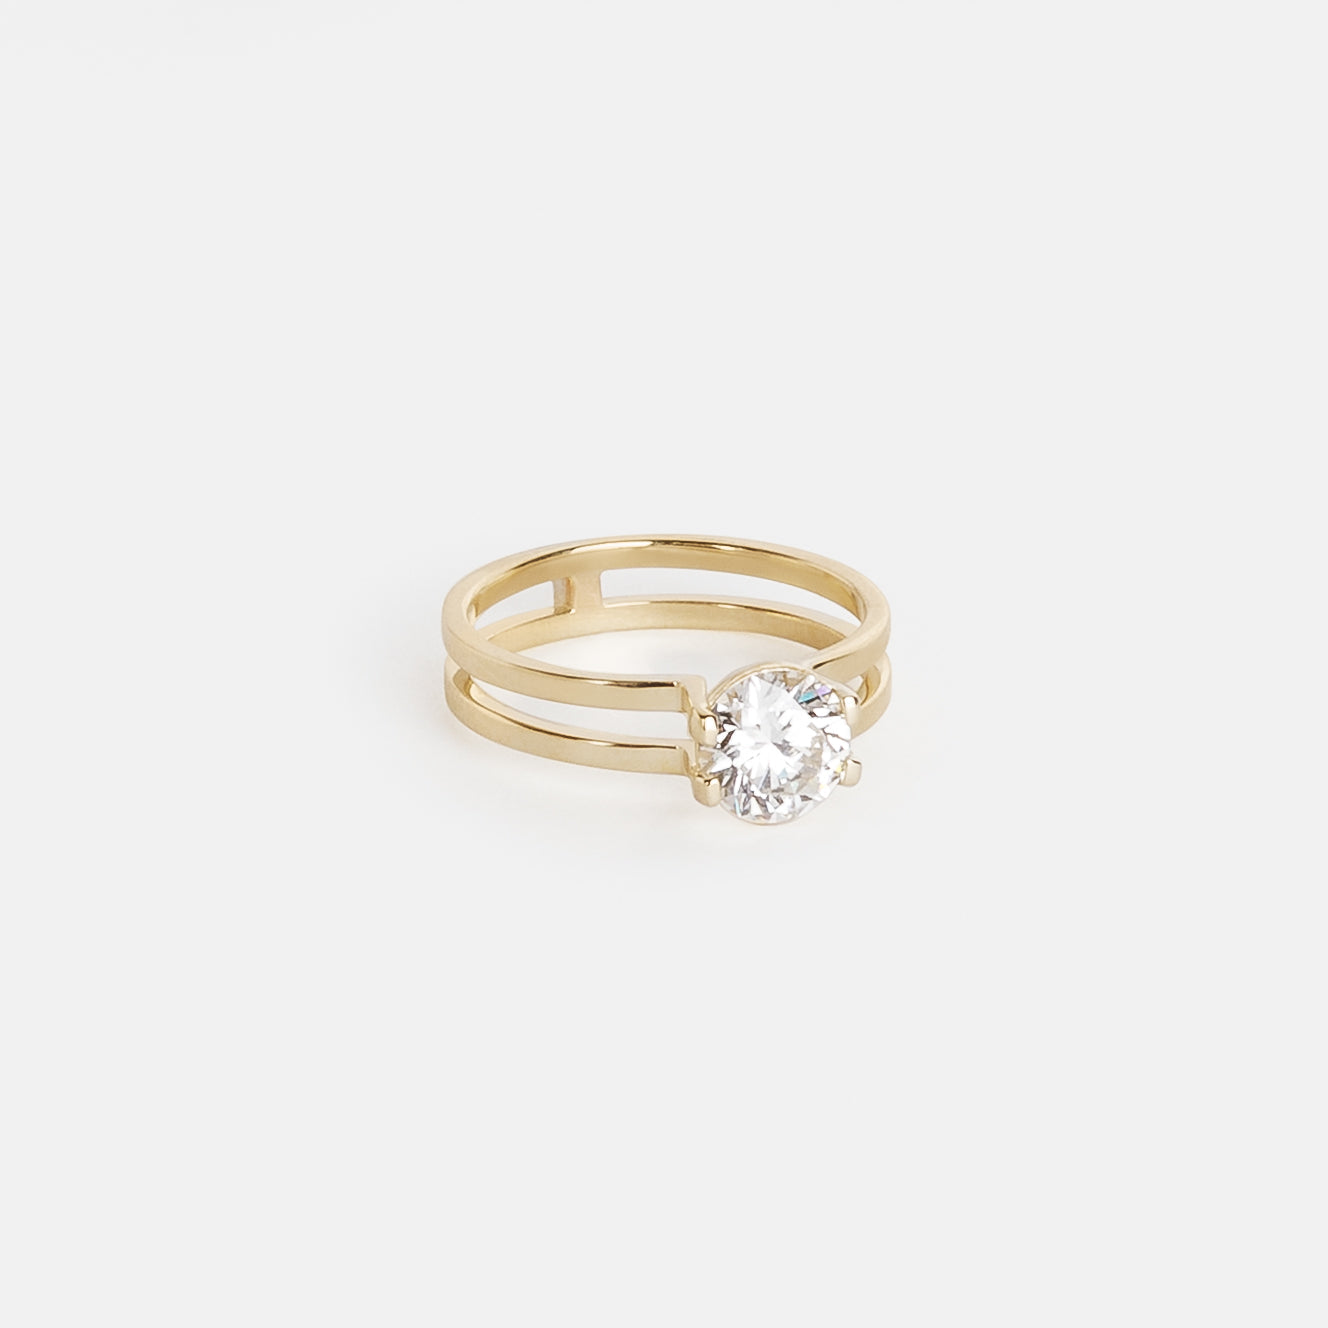 Vedi Unique Ring in 14k Gold set with a 1.01ct round brilliant cut lab-grown diamond By SHW Fine Jewelry NYC